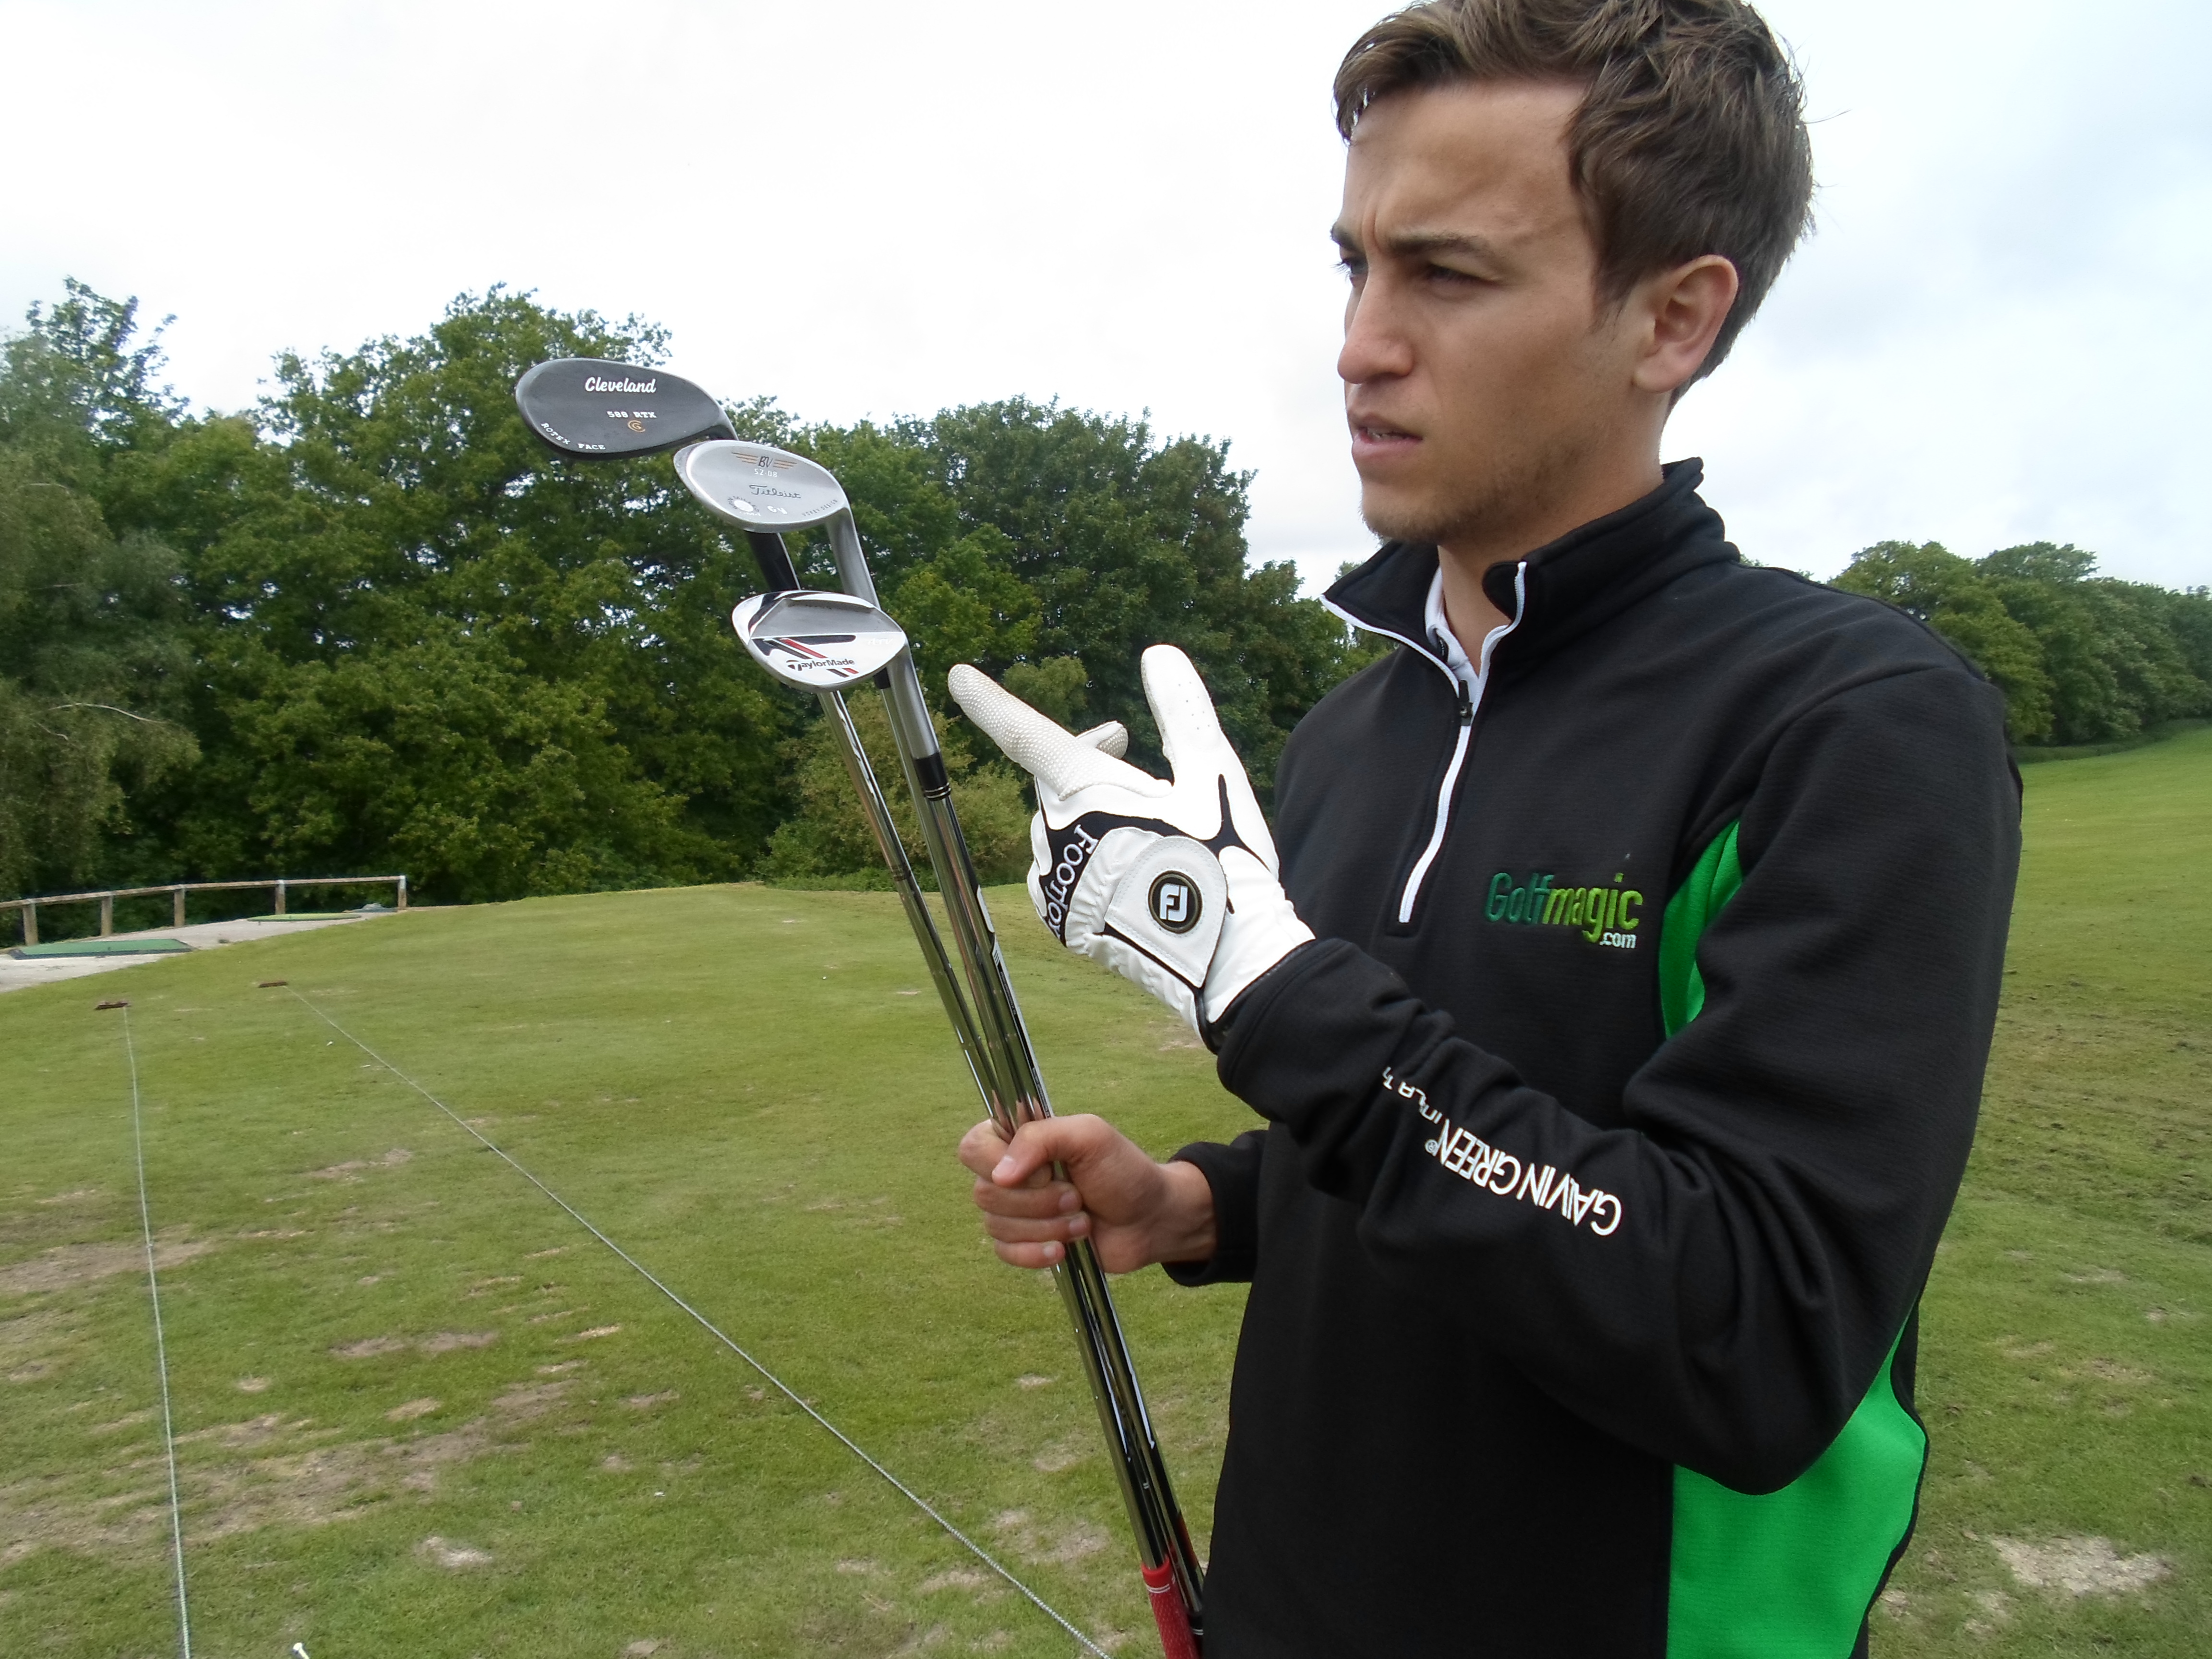 Andy assesses the top three wedges